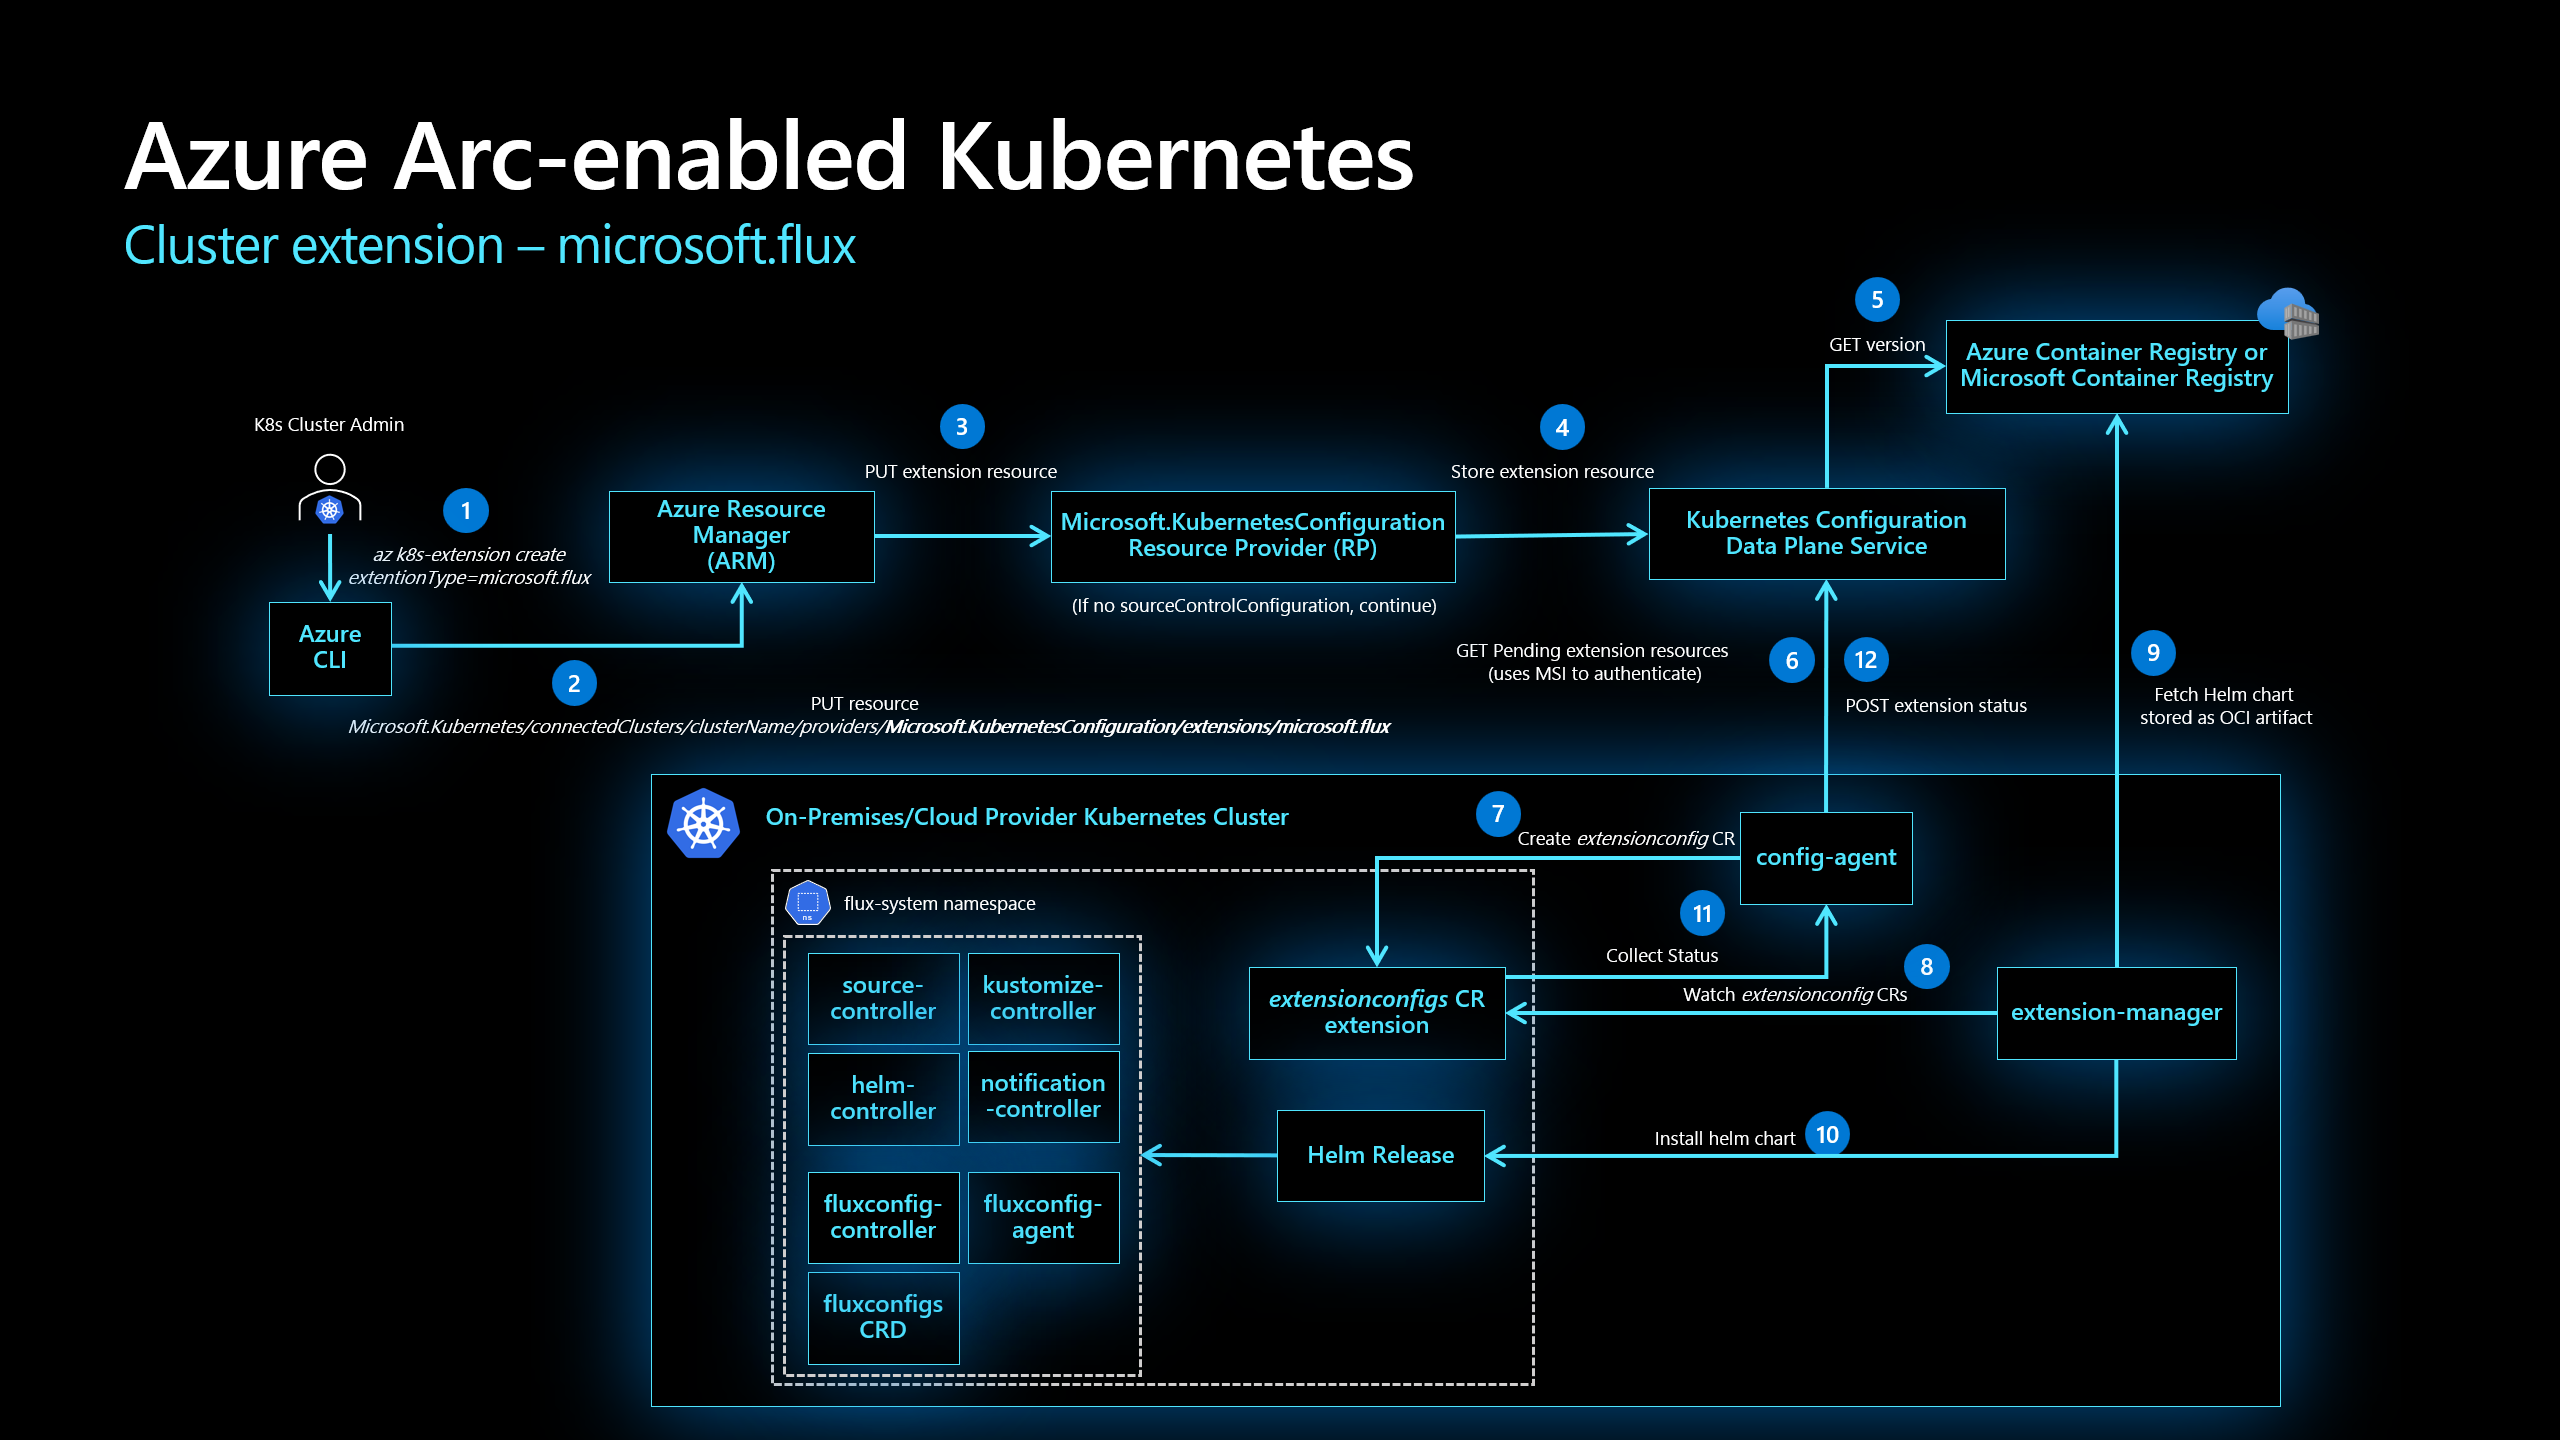 Diagram showing the installation of the Flux extension for Azure Arc-enabled Kubernetes cluster.